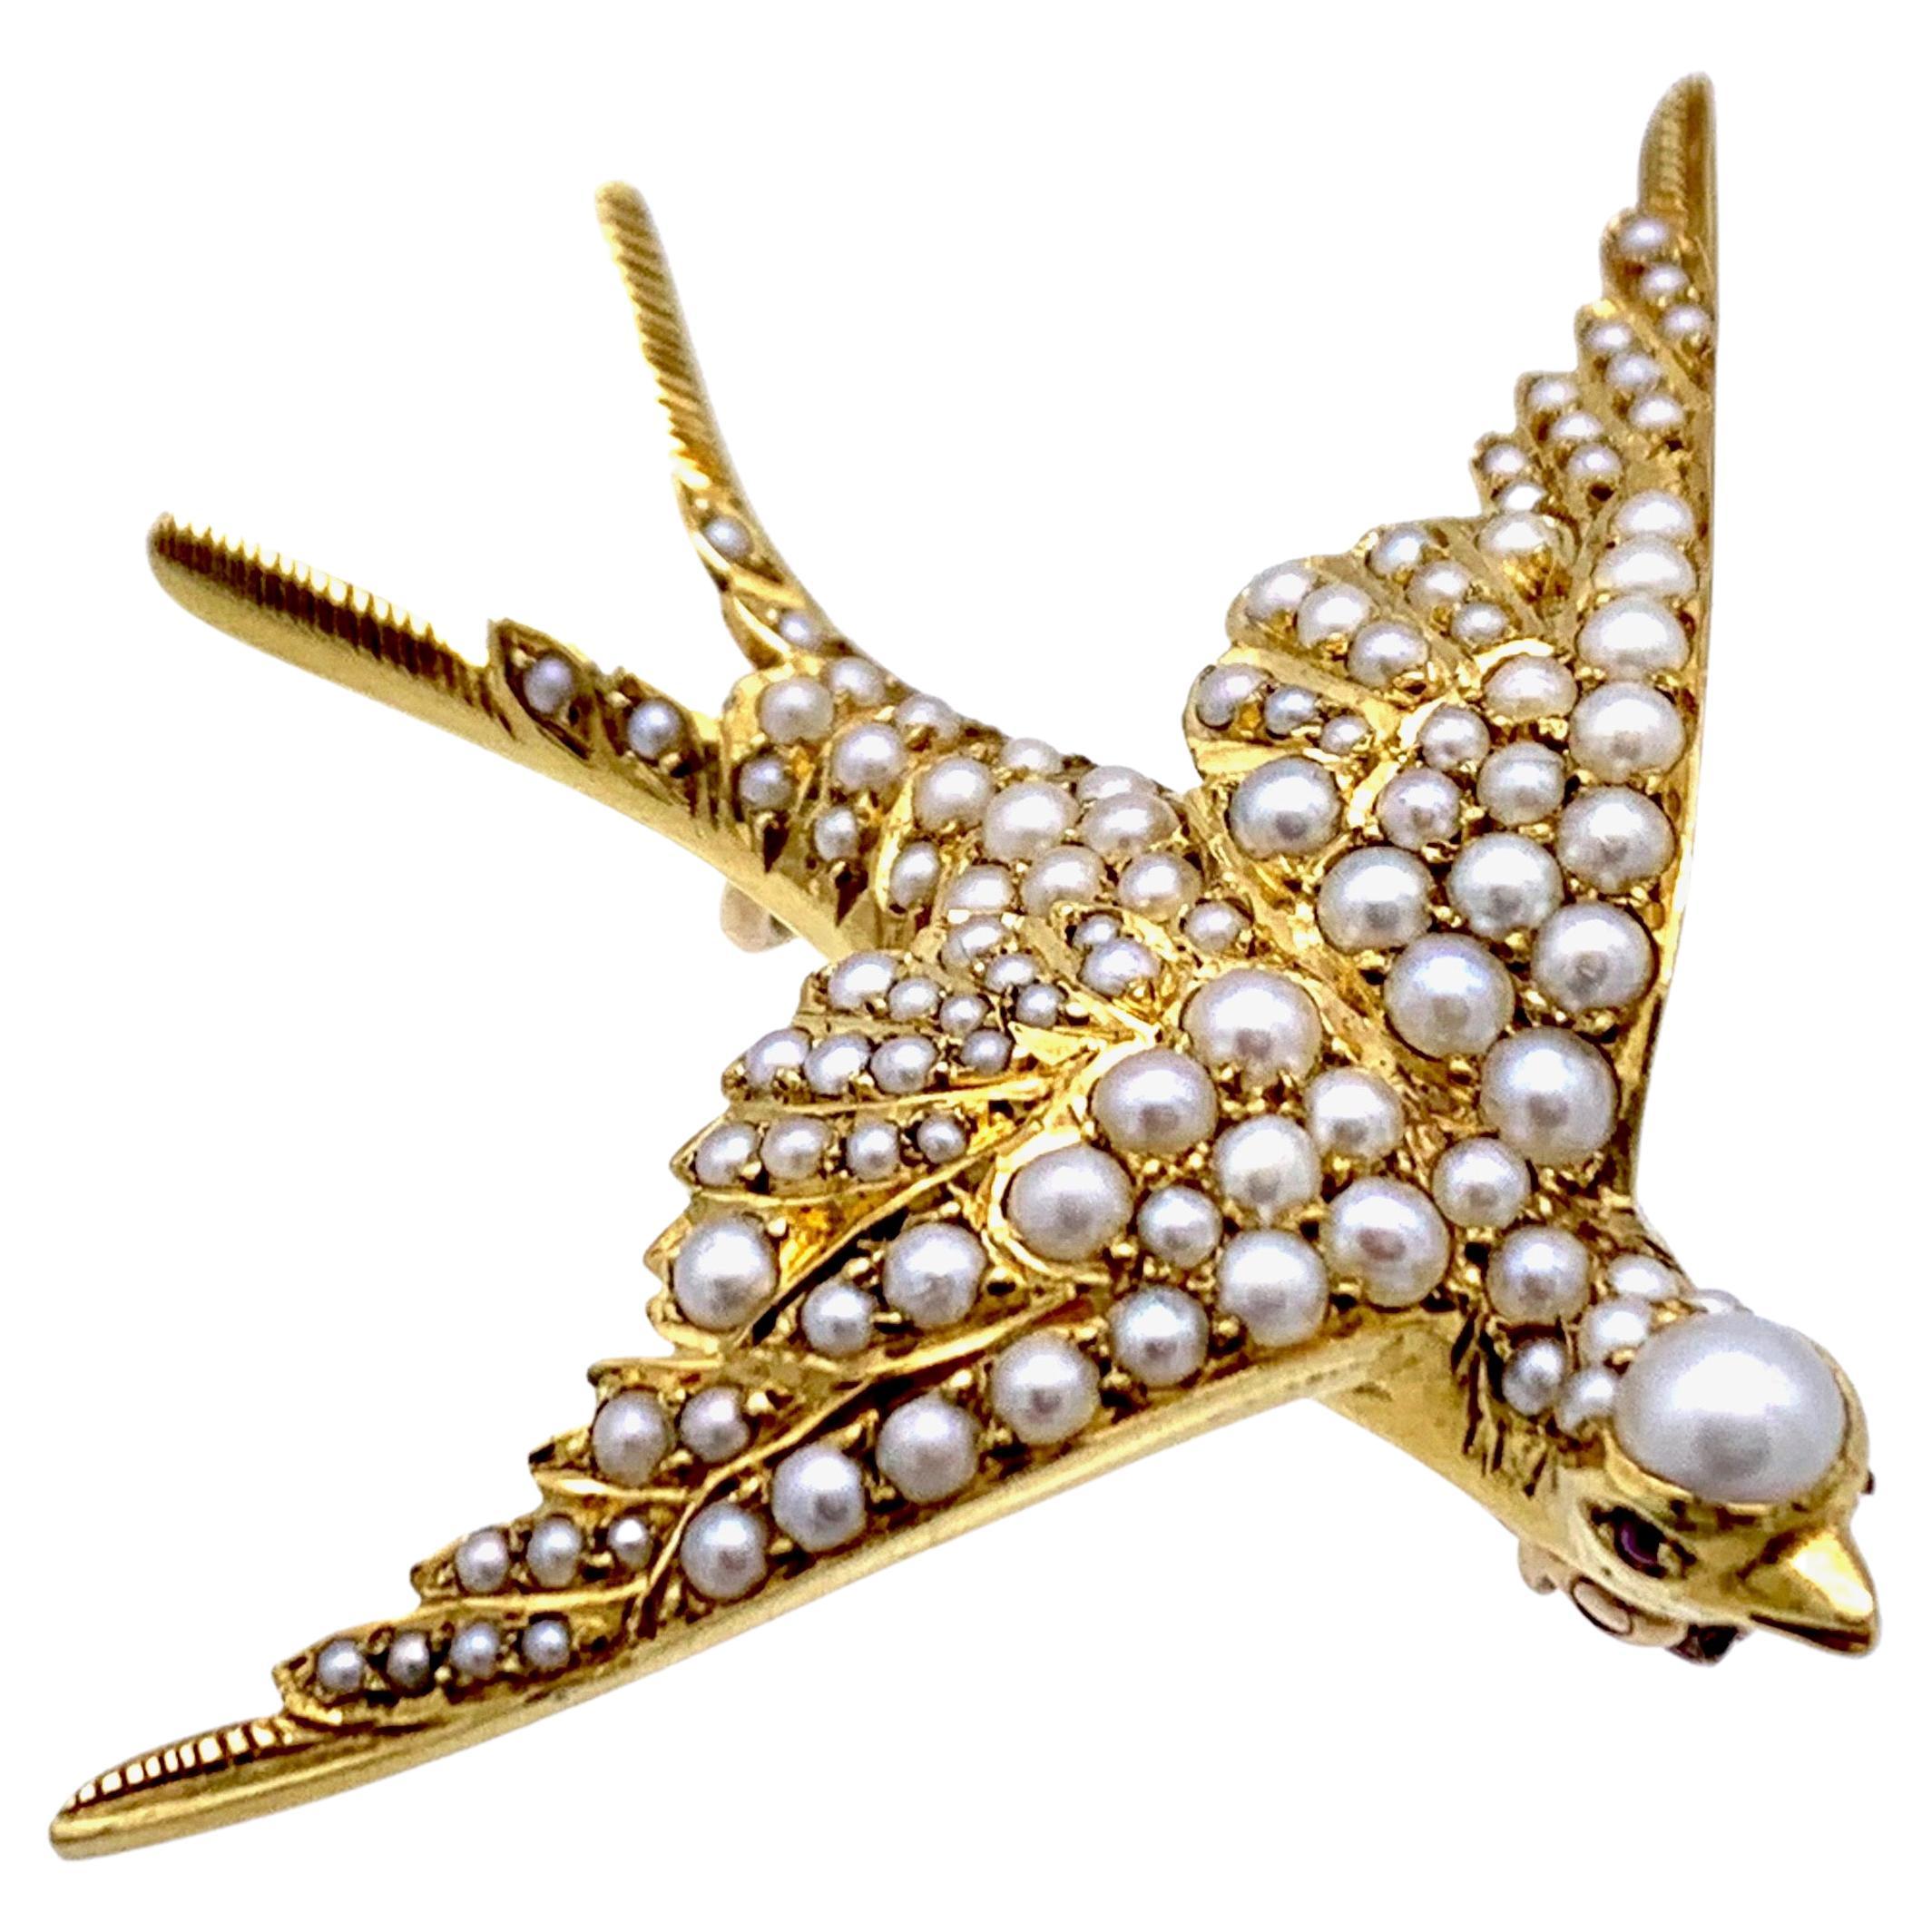 This beautifully modelled swallow in full flight has been handcrafted out of 14 karat gold and is set entirely with oriental pearls.